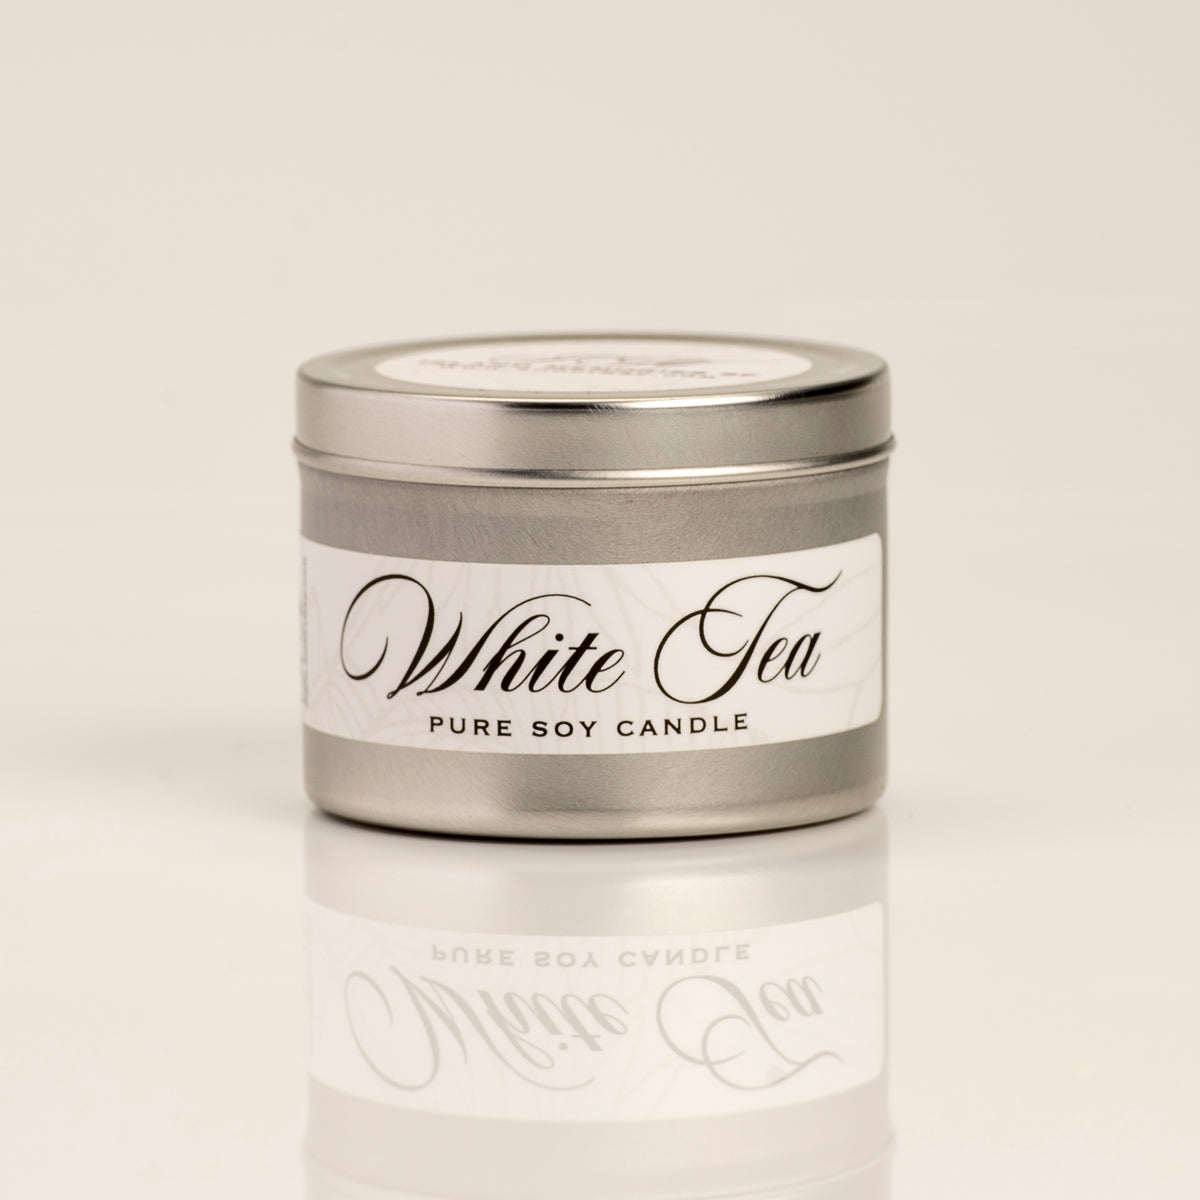 White Tea + Thyme Soy Wax Candle - Travel Tin – Seventh Avenue